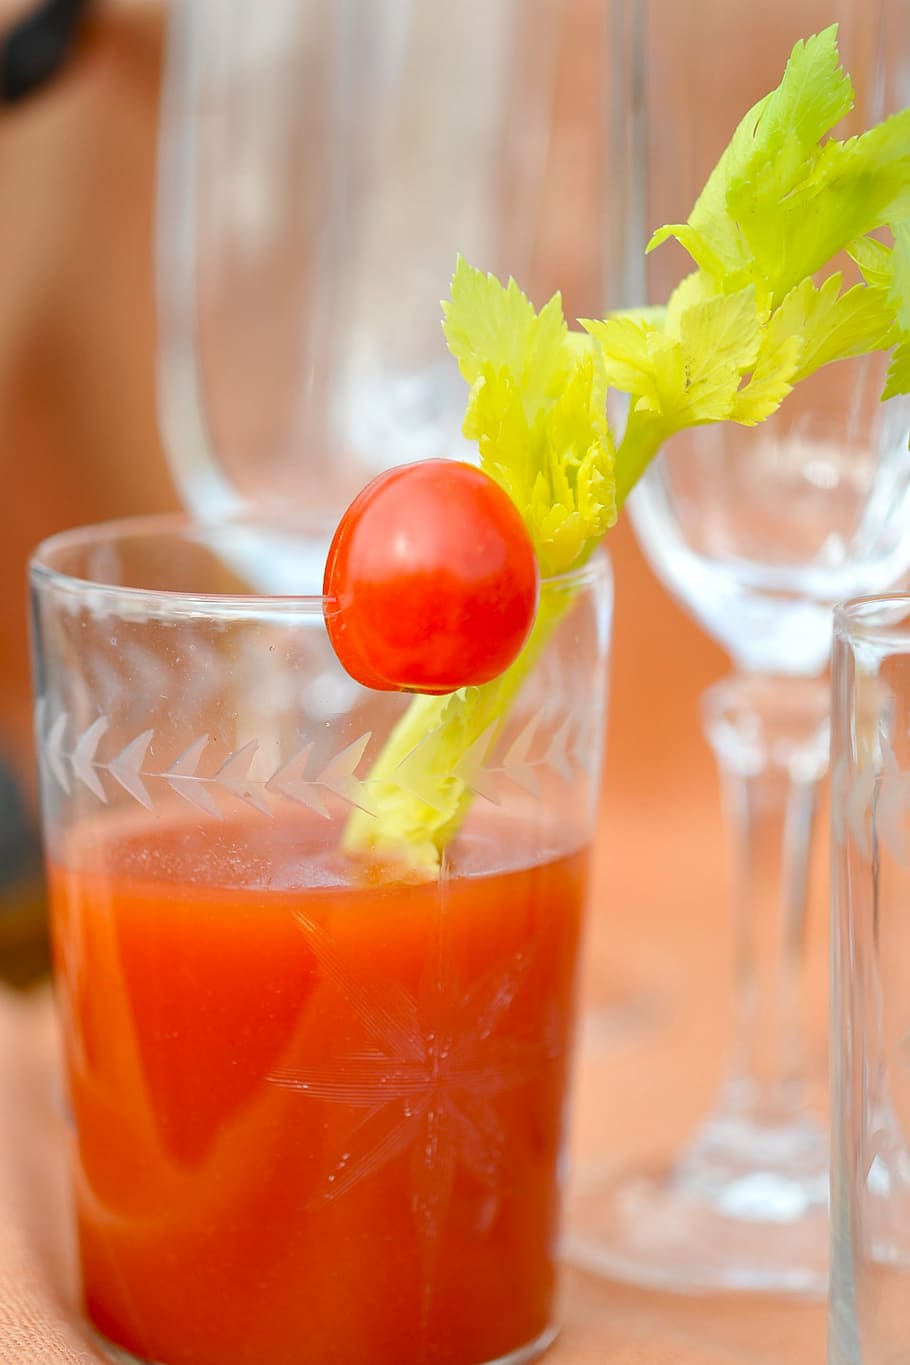 tomato juice, drink, bloody mary, alcohol, glass, celery, red